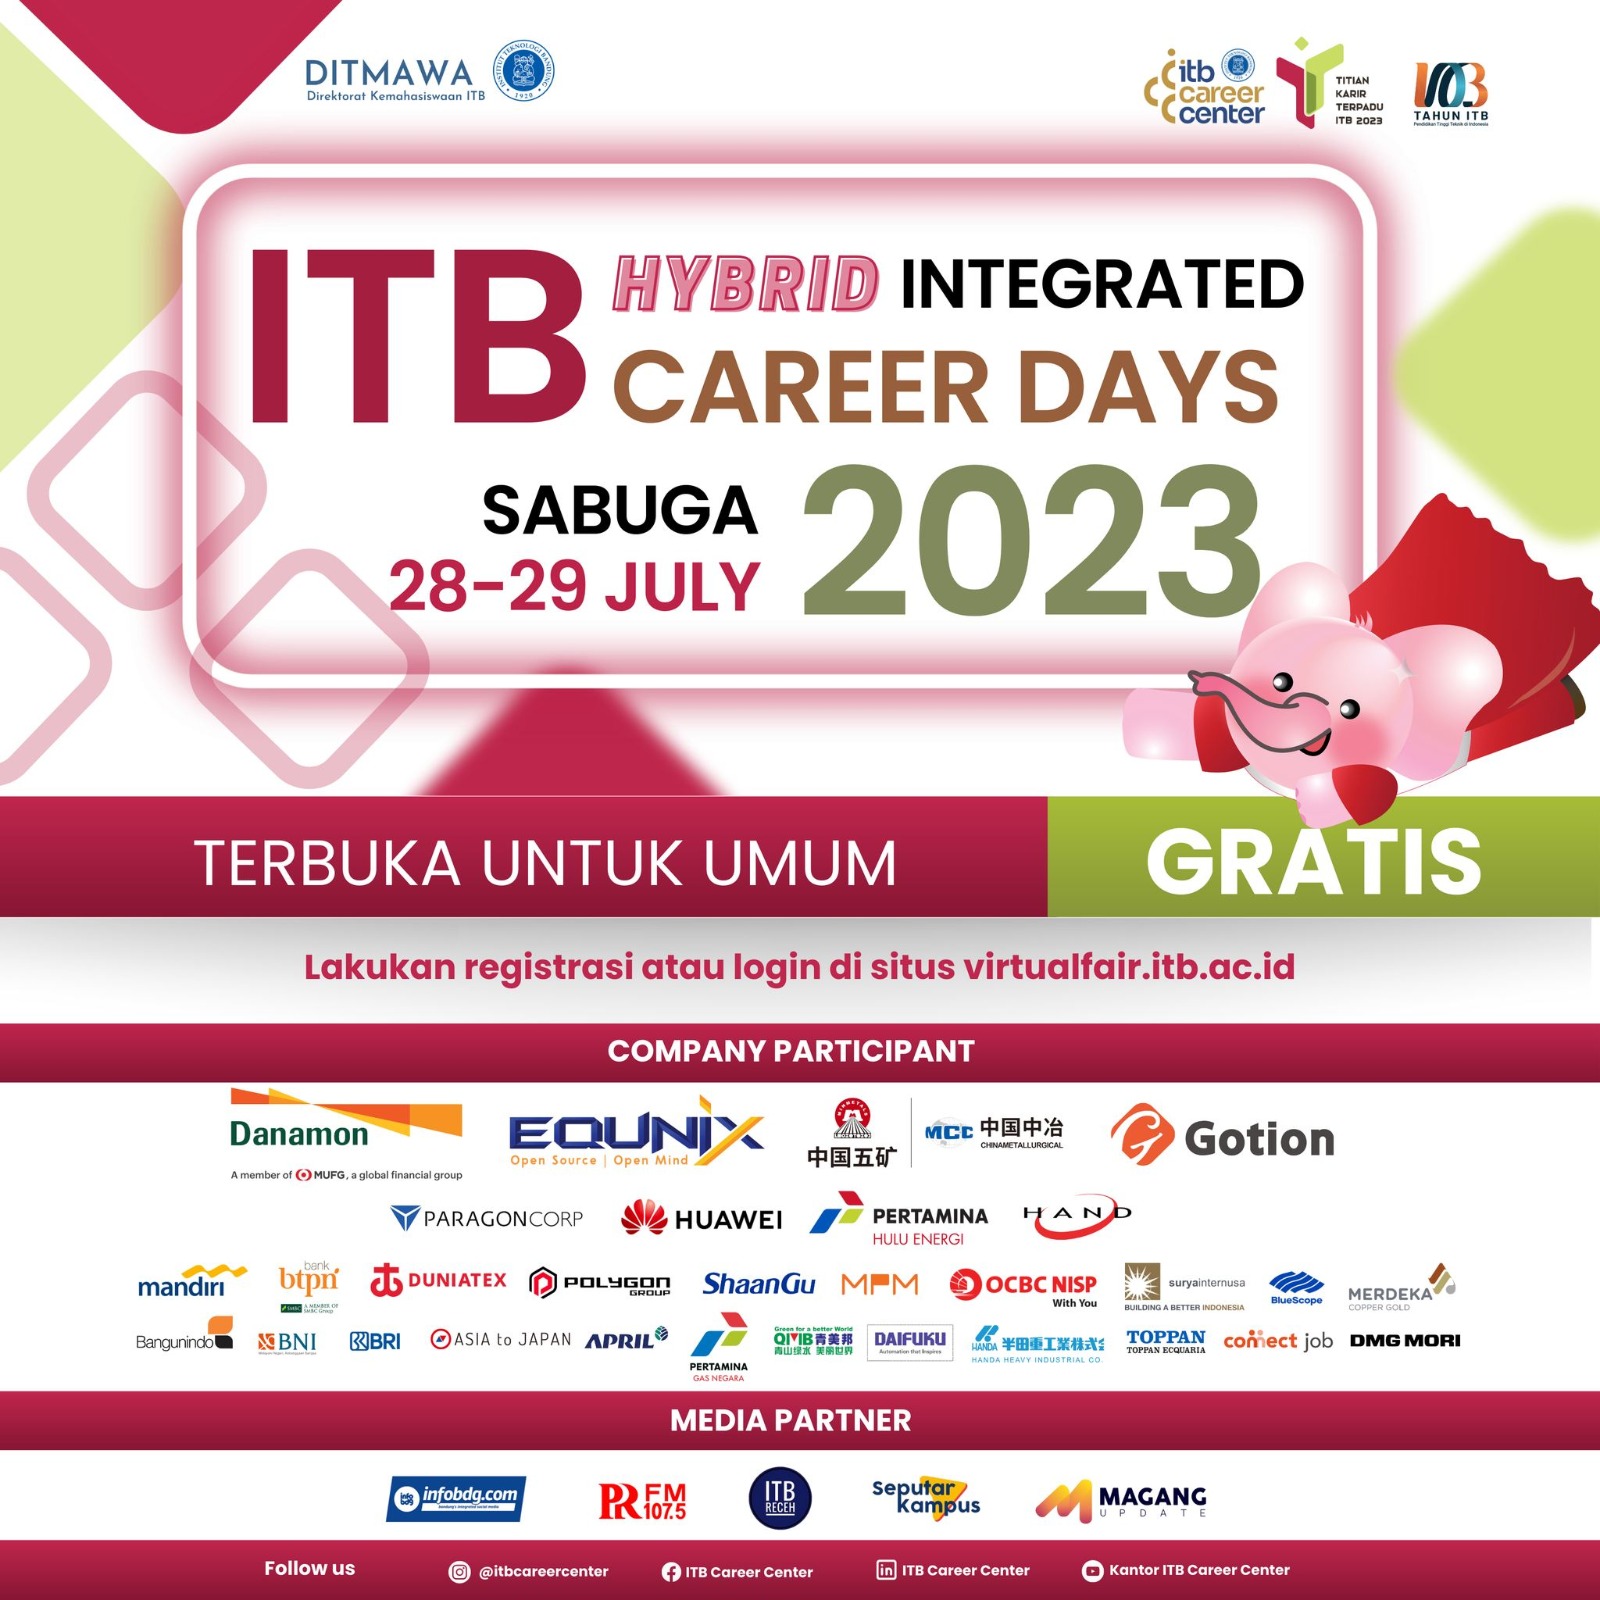 ITB INTEGRATED CAREER DAYS 2023